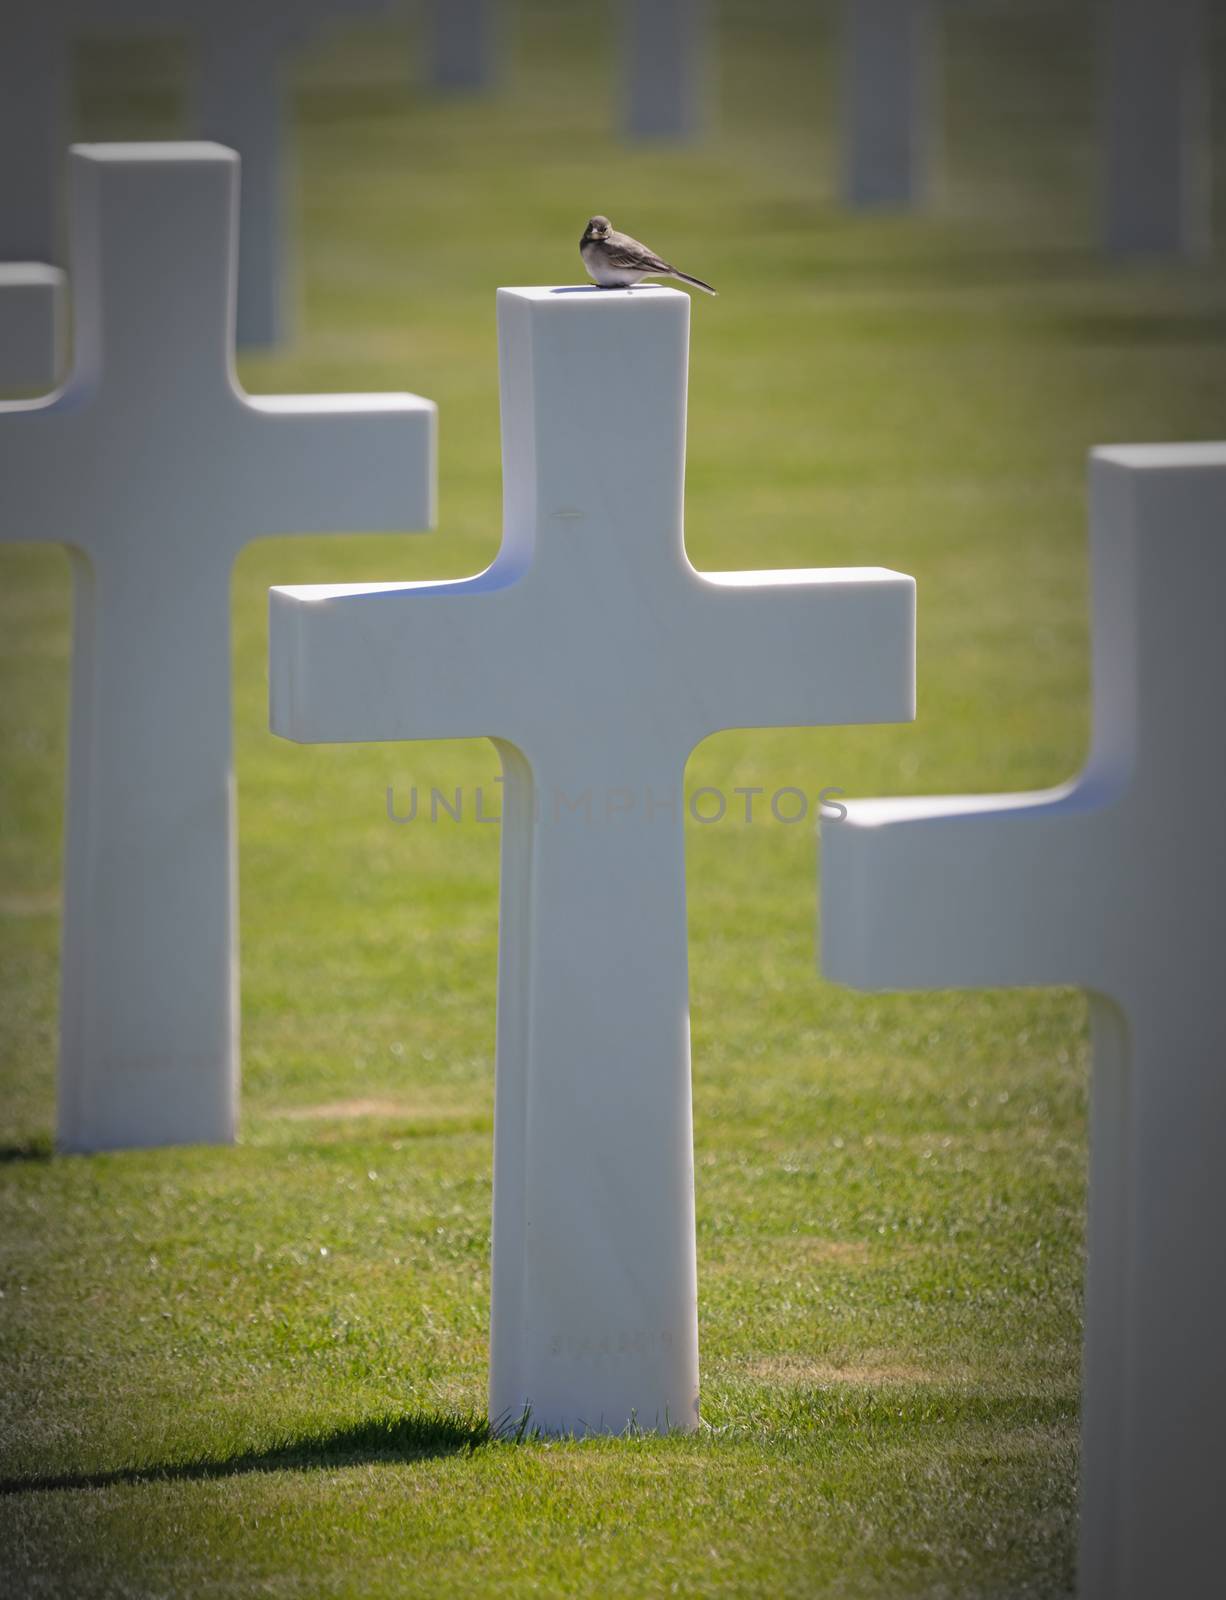 The American military cemetary in Luxembourg, bird on top of a g by michaklootwijk